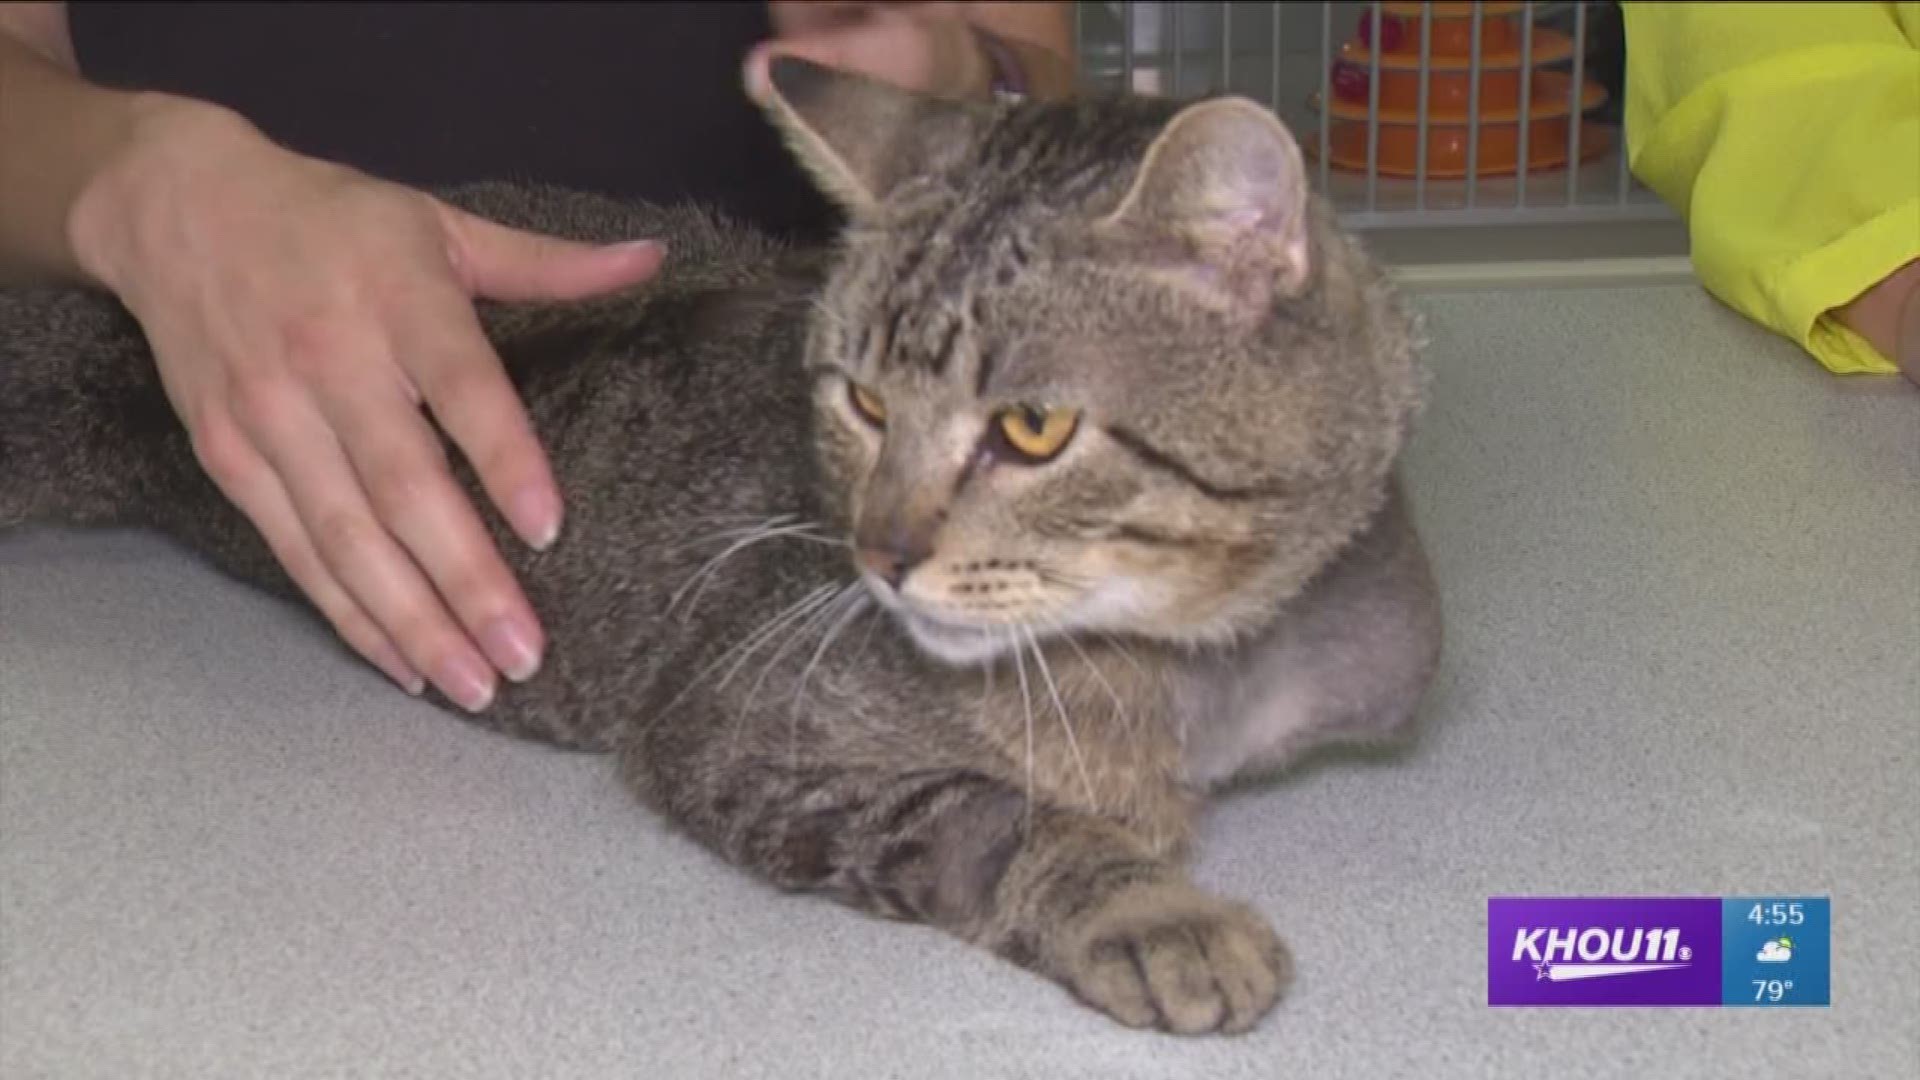 KHOU 11 reporter Lisa Hernandez is at the Houston SPCA to introduce Coleman, an adult cat who has recovered from having one of his legs amputated and is currently up for adoption.